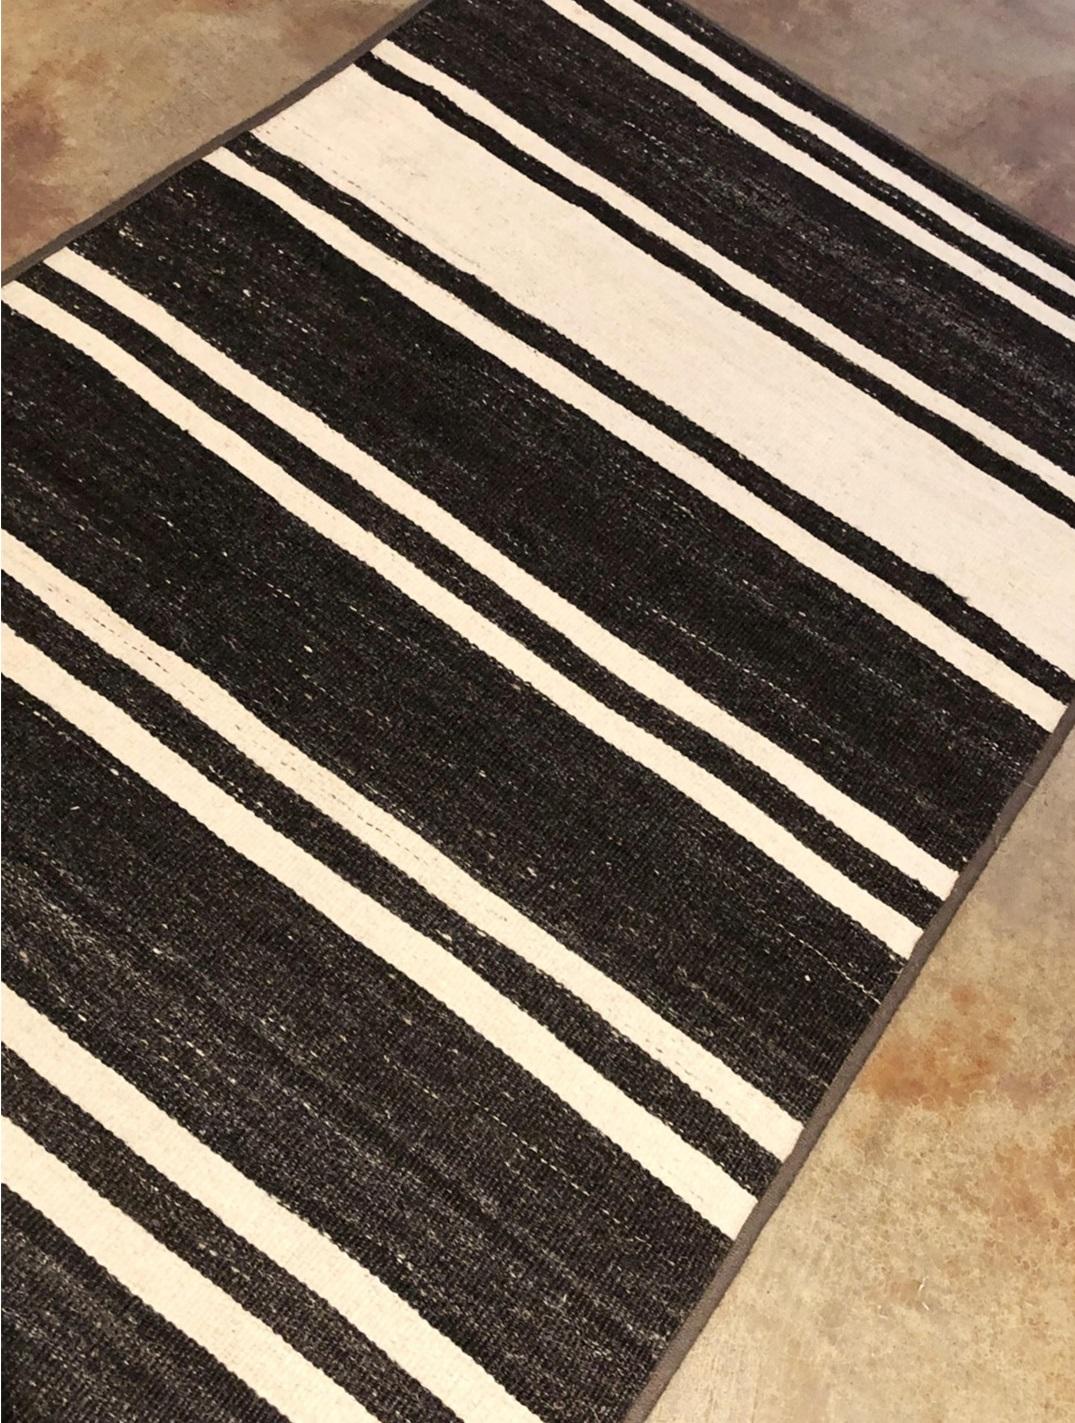 Banded Karapinar Anatolian Striped Kilim Wide Runner In Good Condition For Sale In Chicago, IL